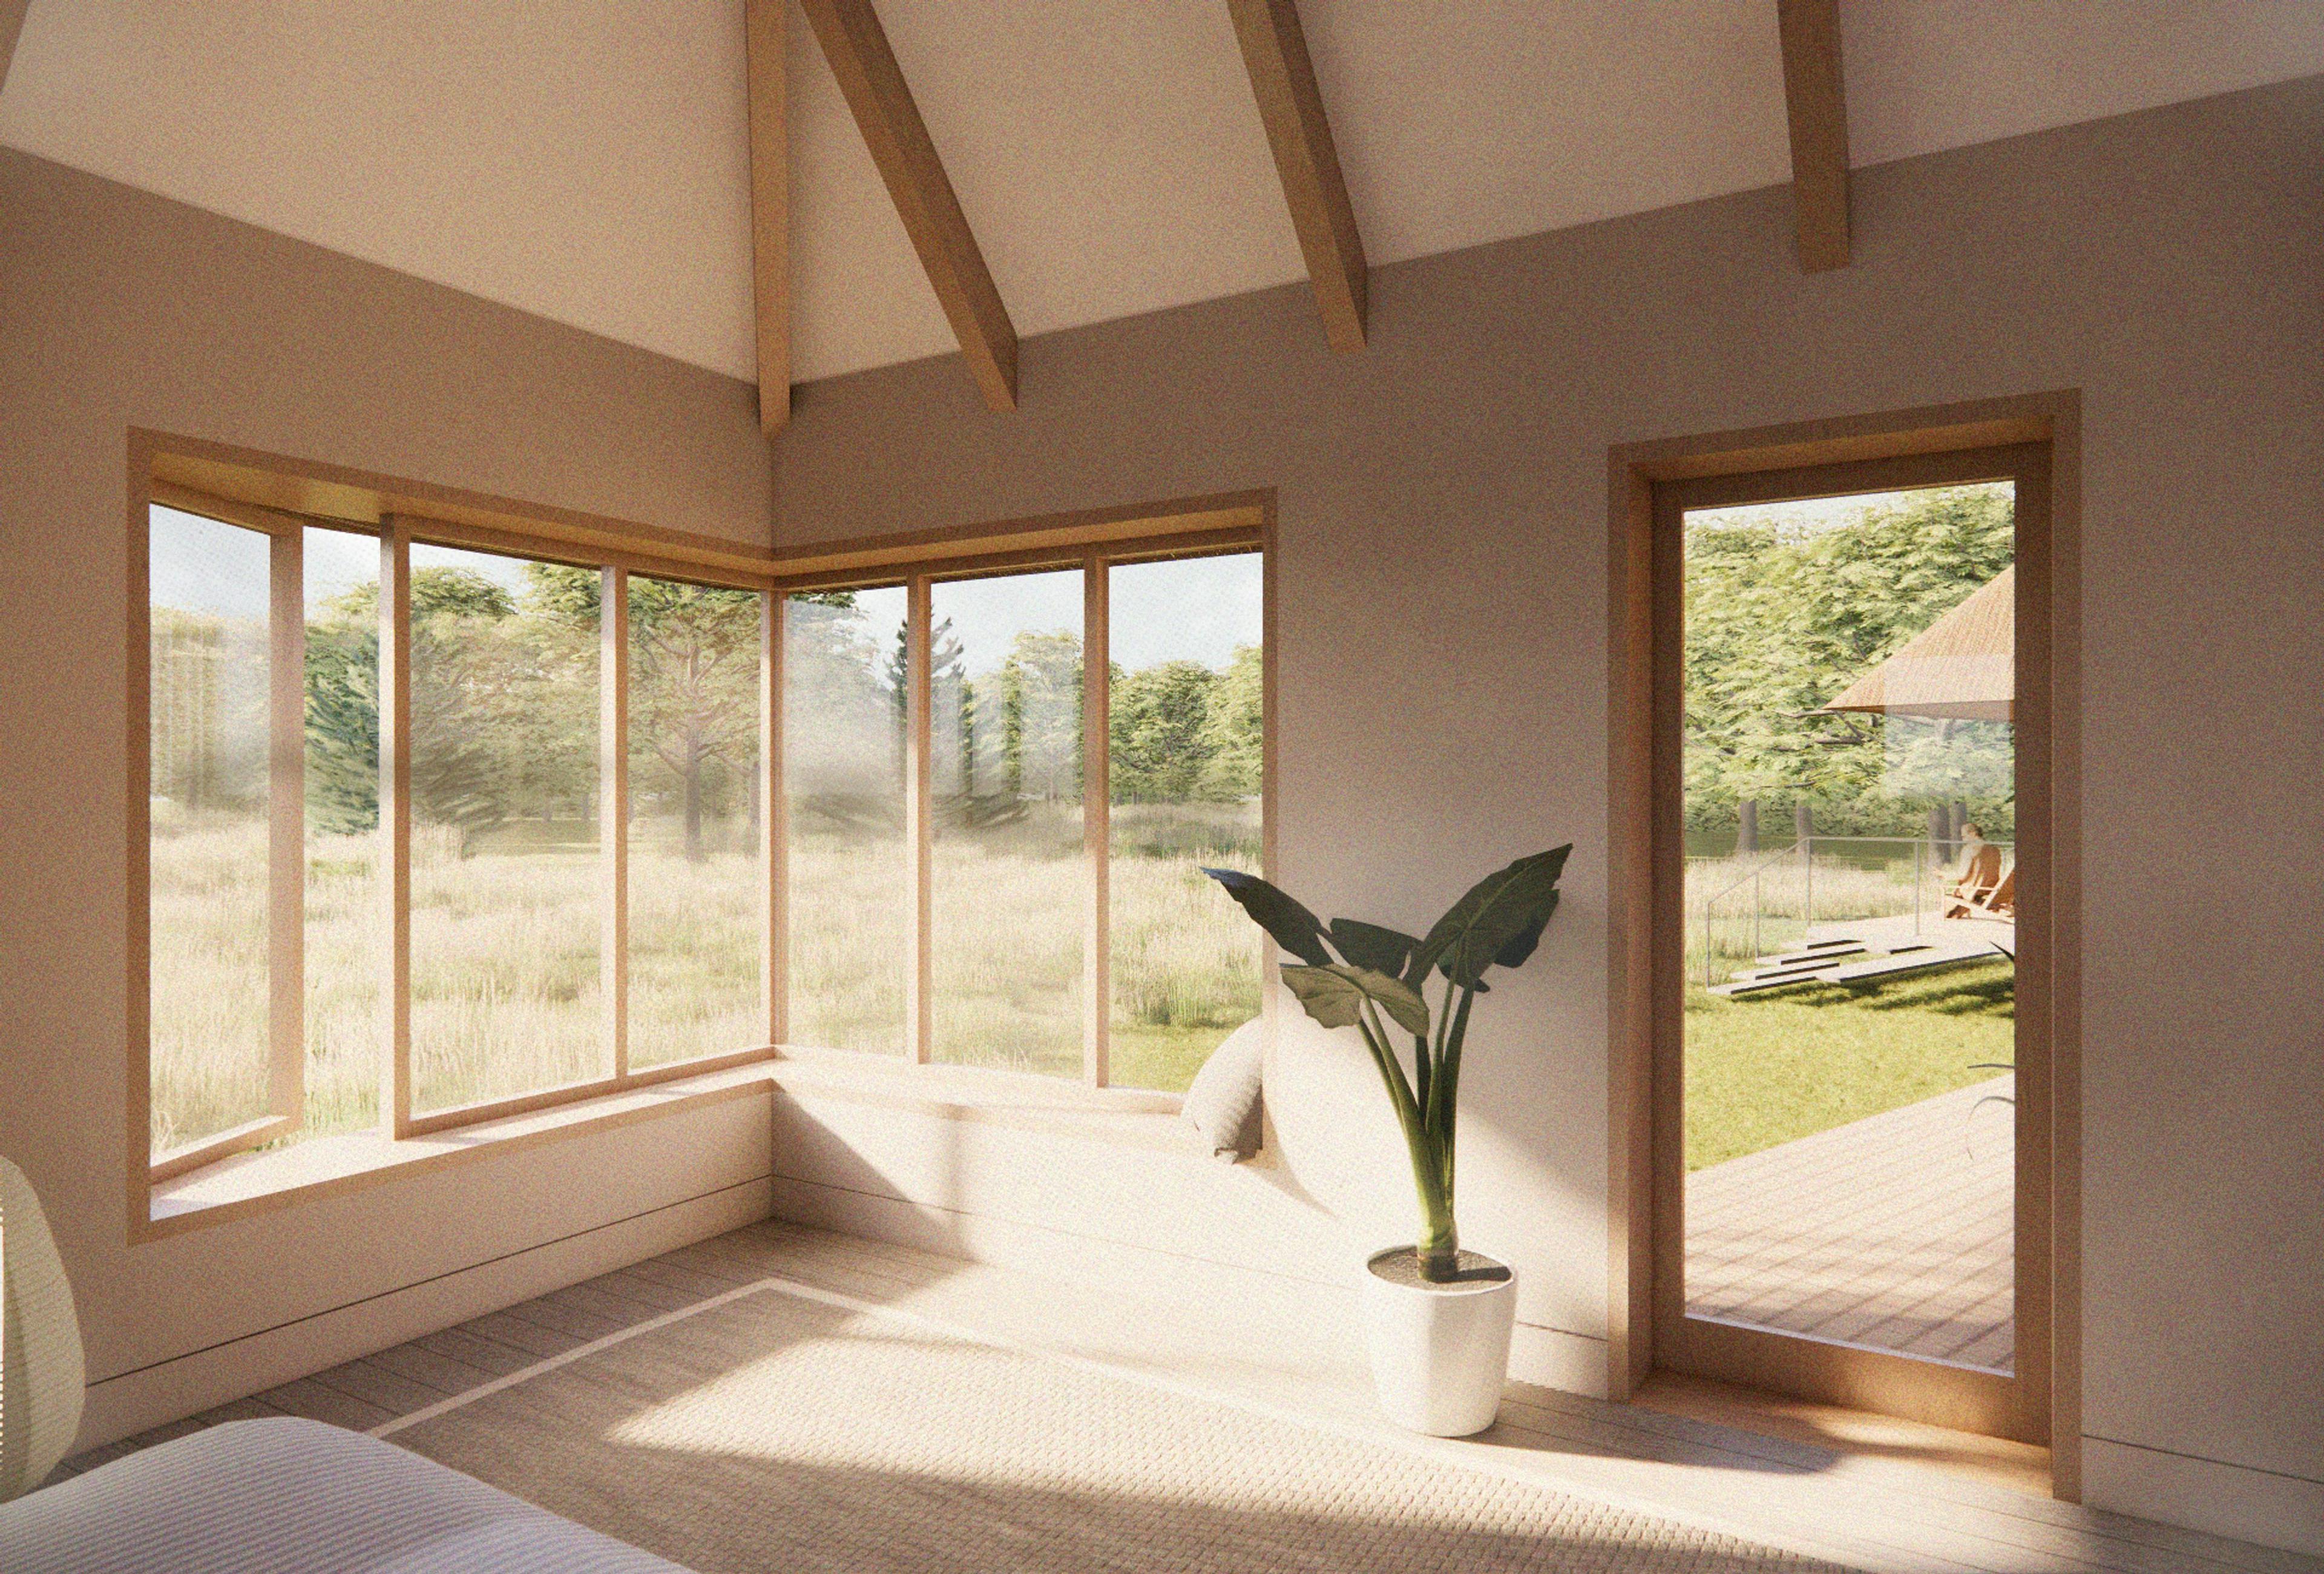 A radically low-impact thatch and straw home in the countryside
